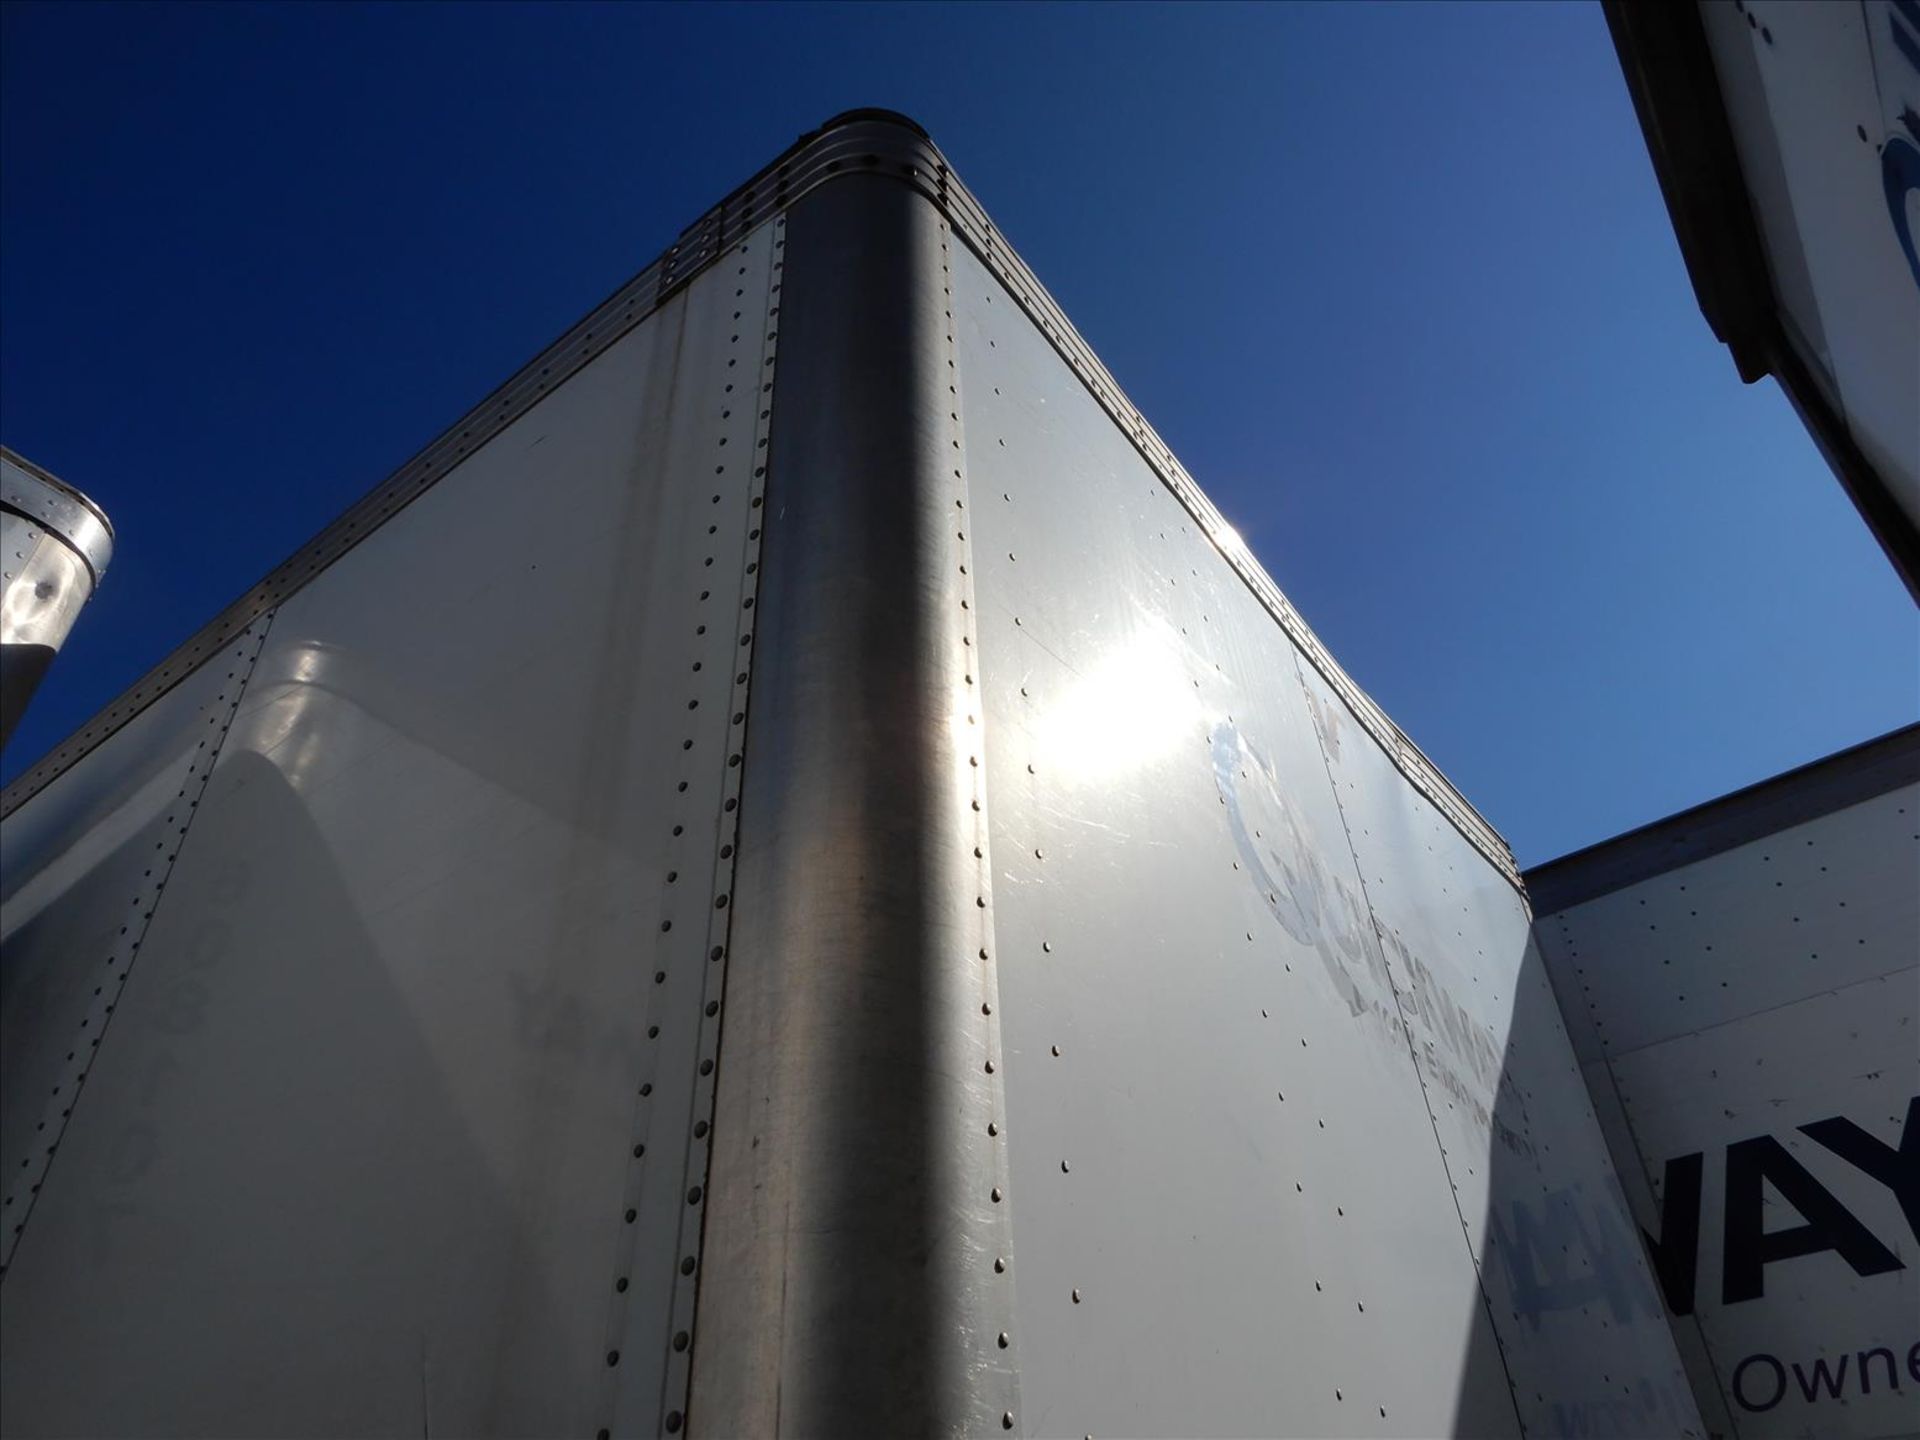 2012 Vanguard Trailer - Located in Indianapolis, IN - Image 2 of 28